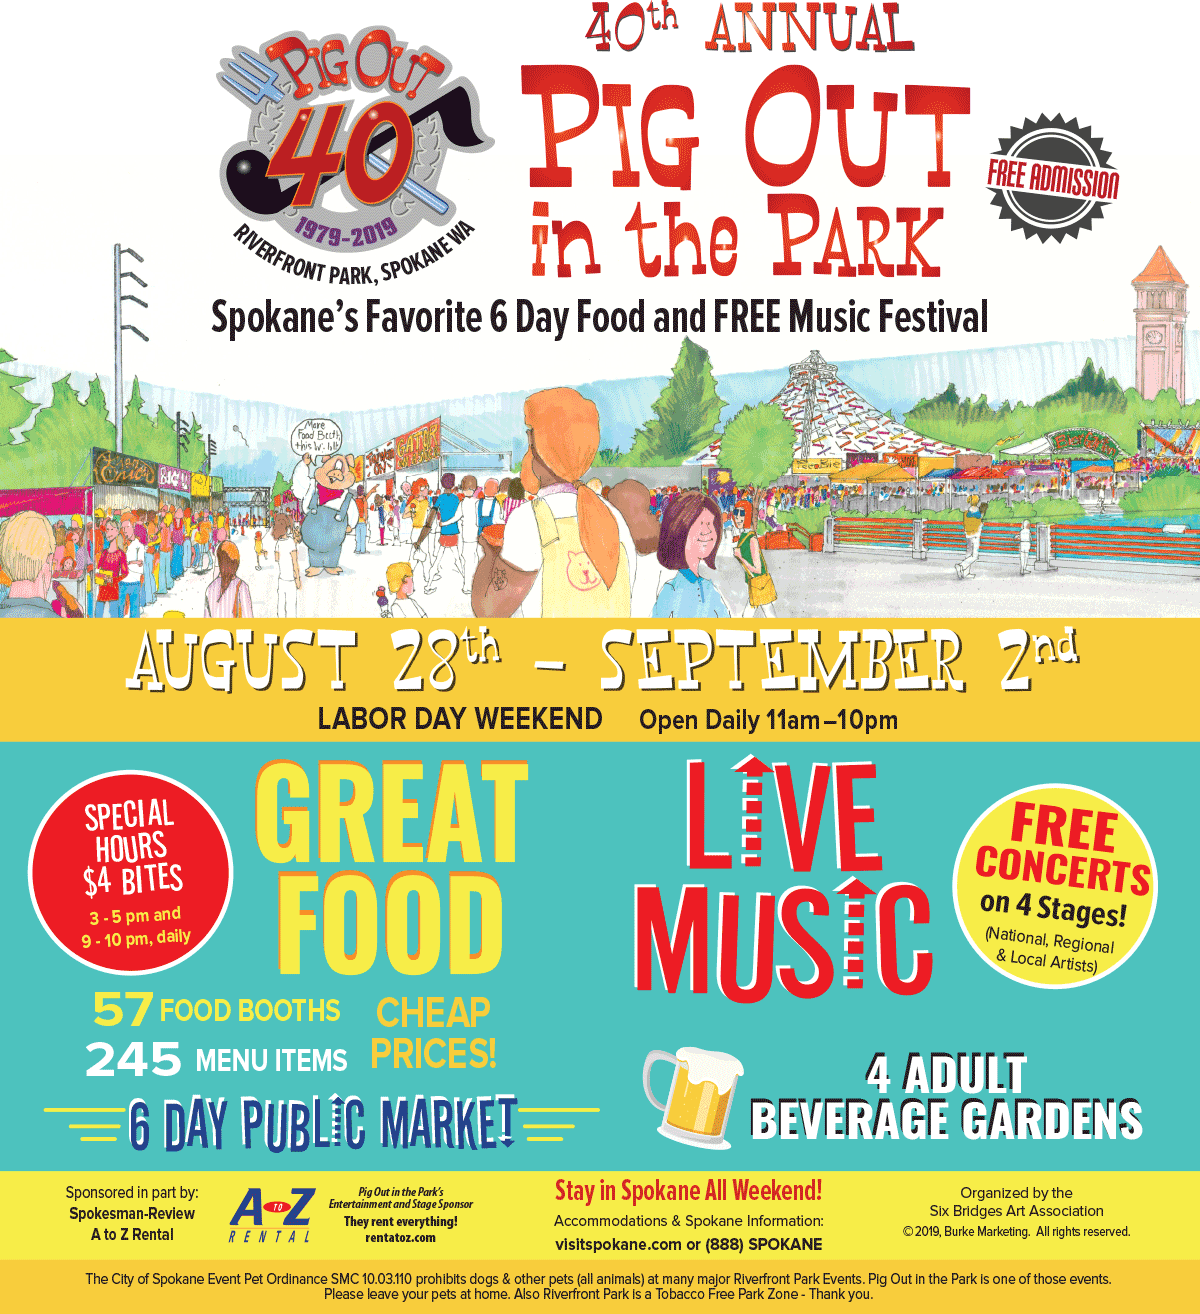 40th Annual Pig Out in the Park